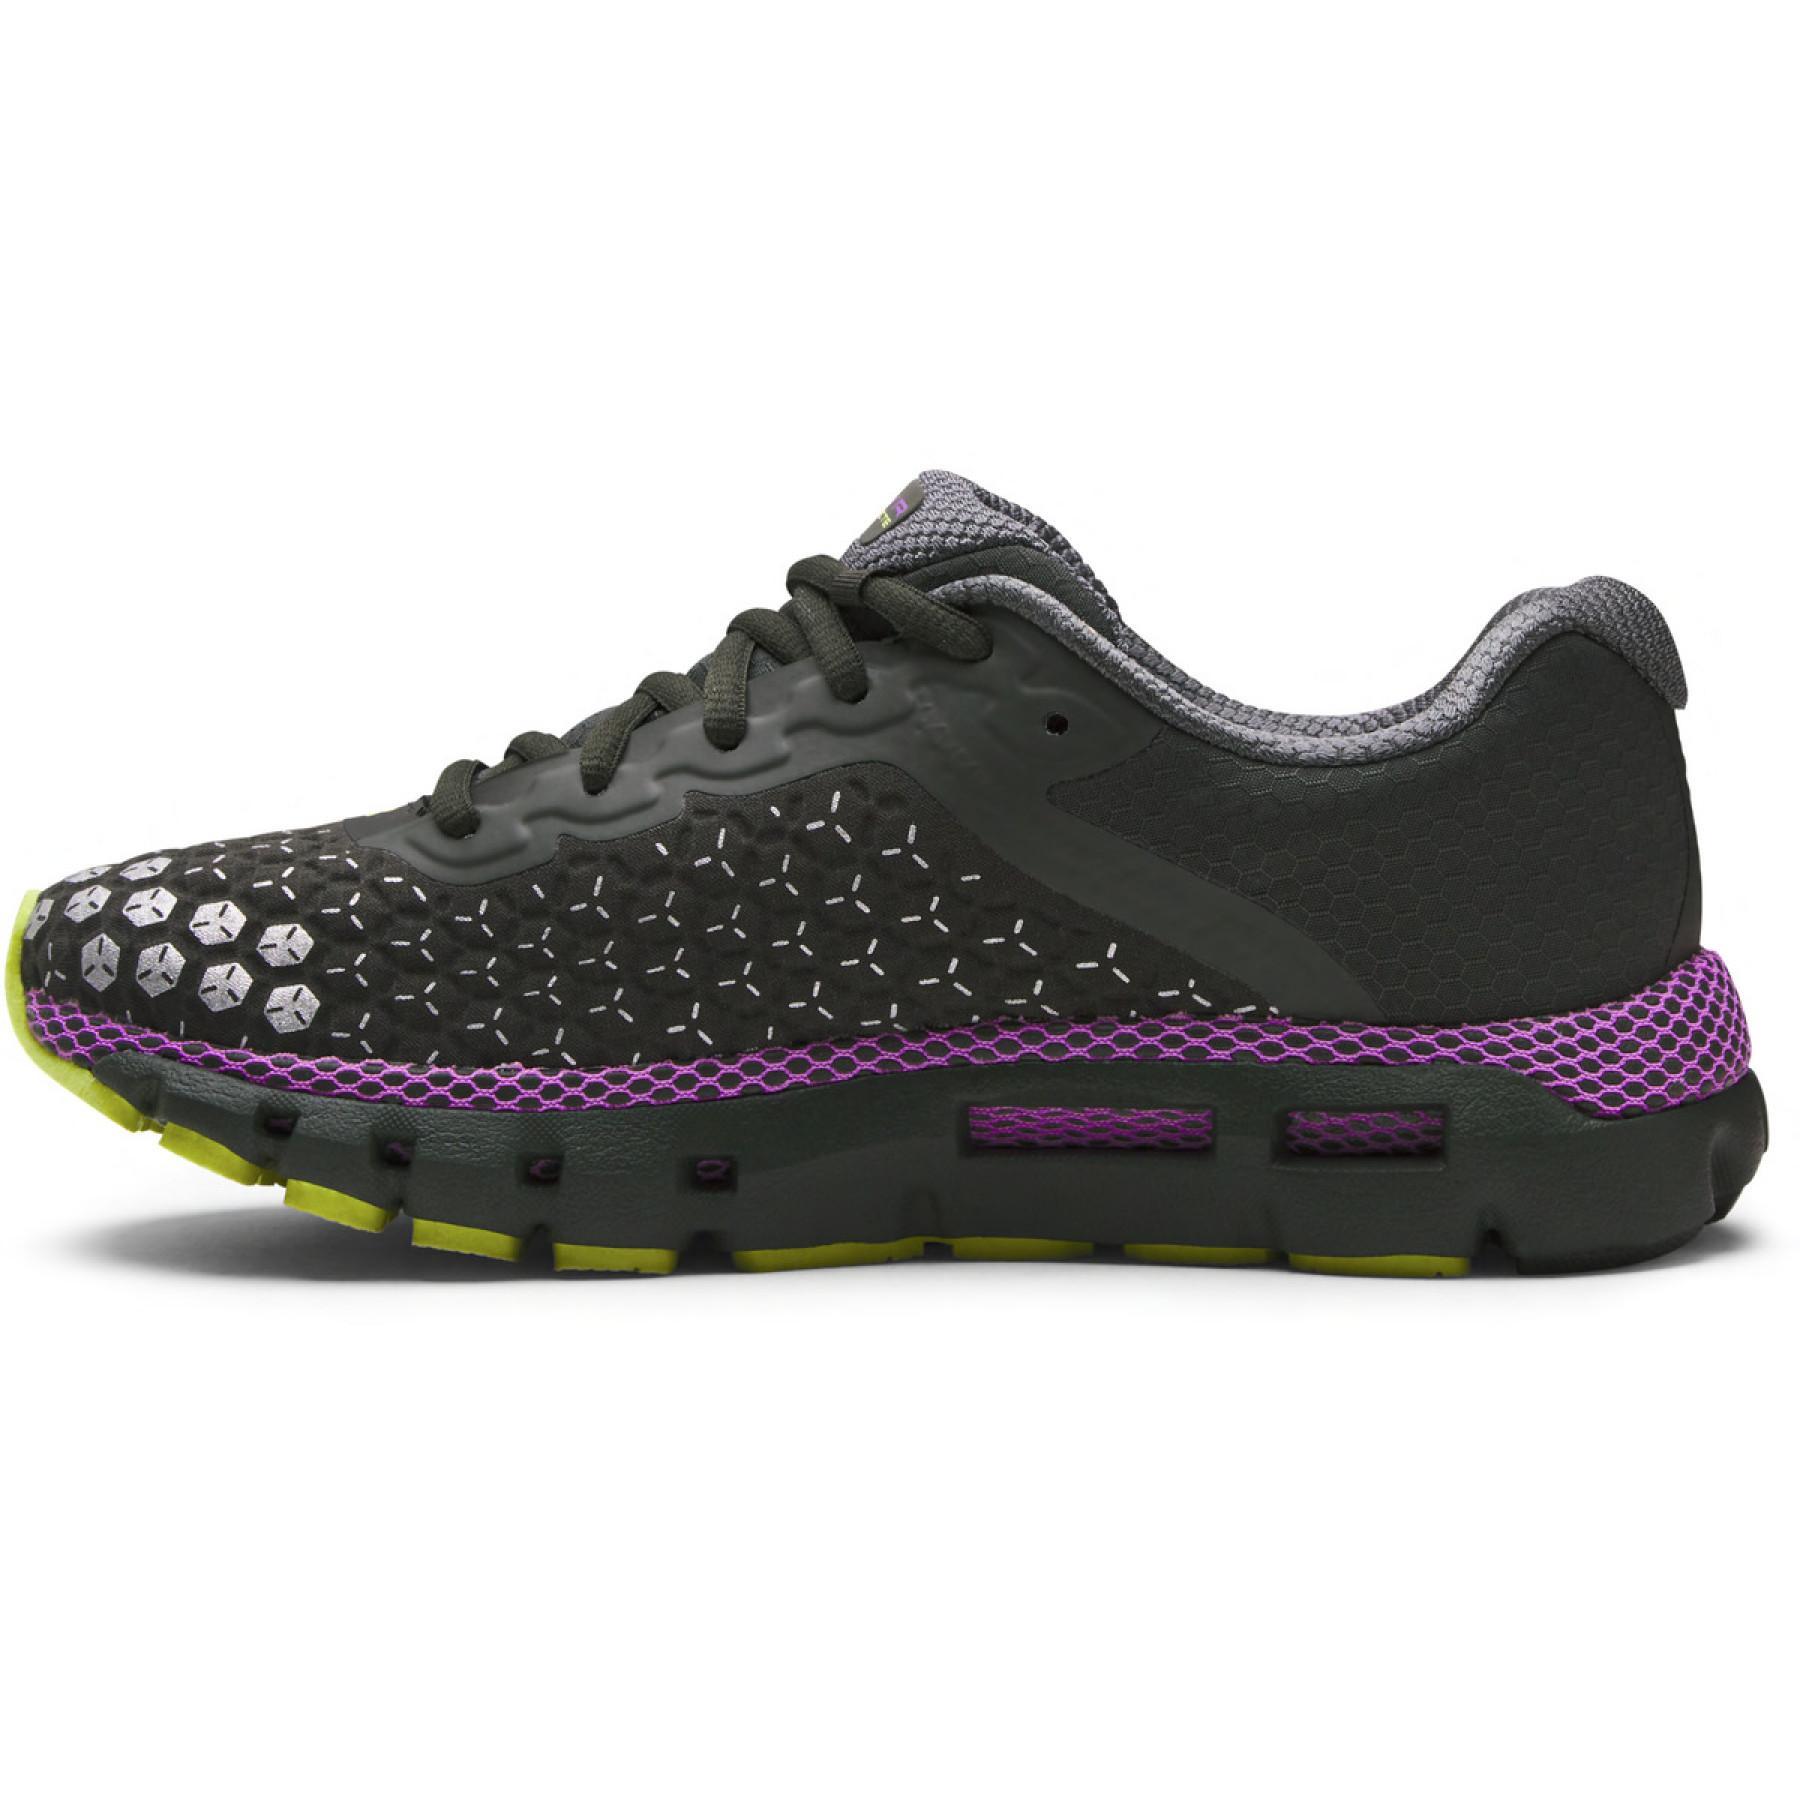 Women's running shoes Under Armour HOVR Infinite 2 Storm